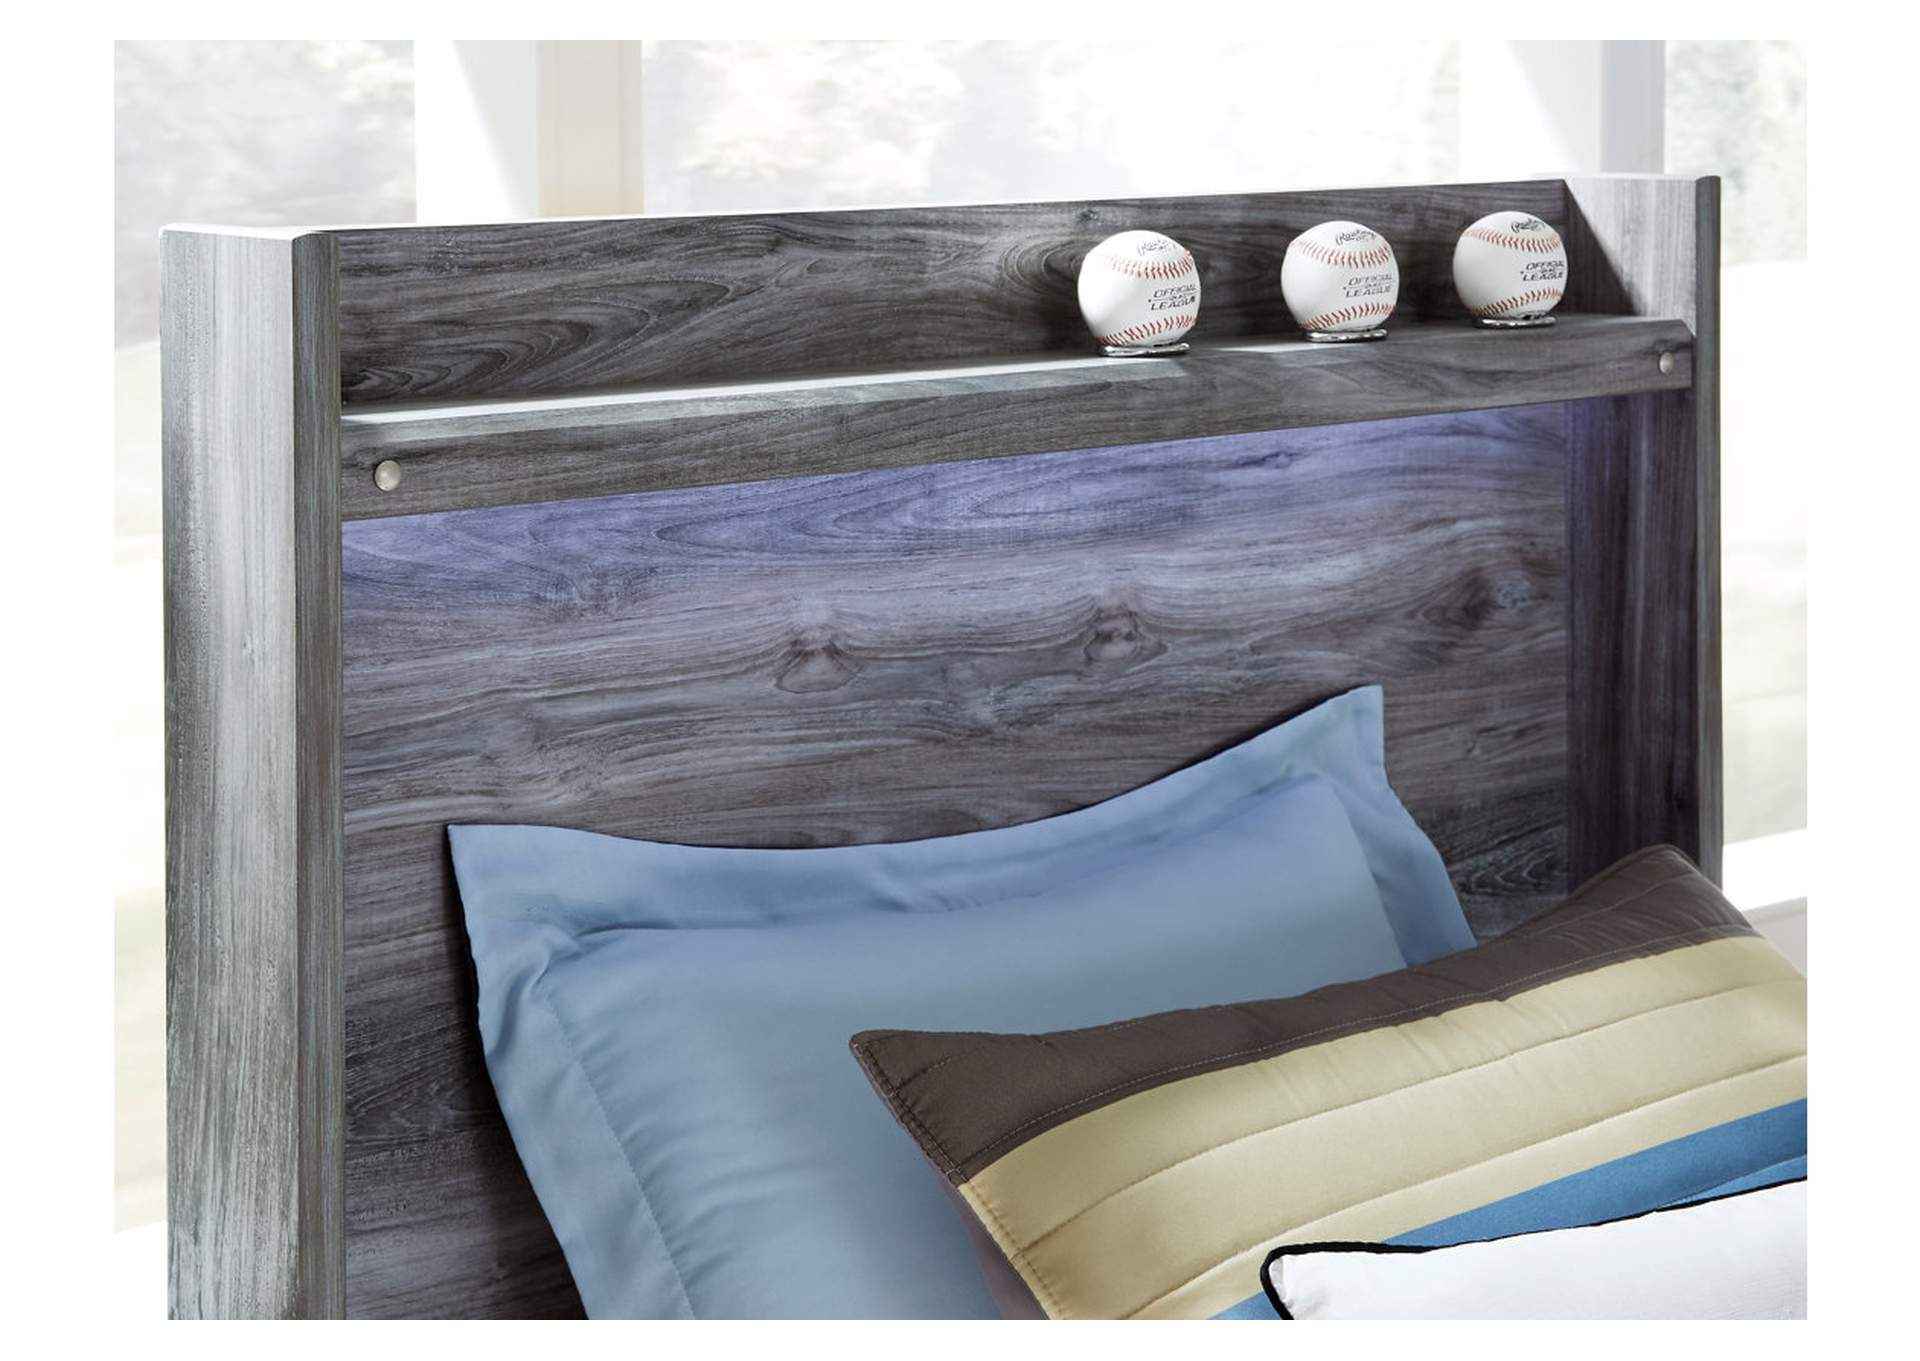 Baystorm Full Panel Bed,Signature Design By Ashley